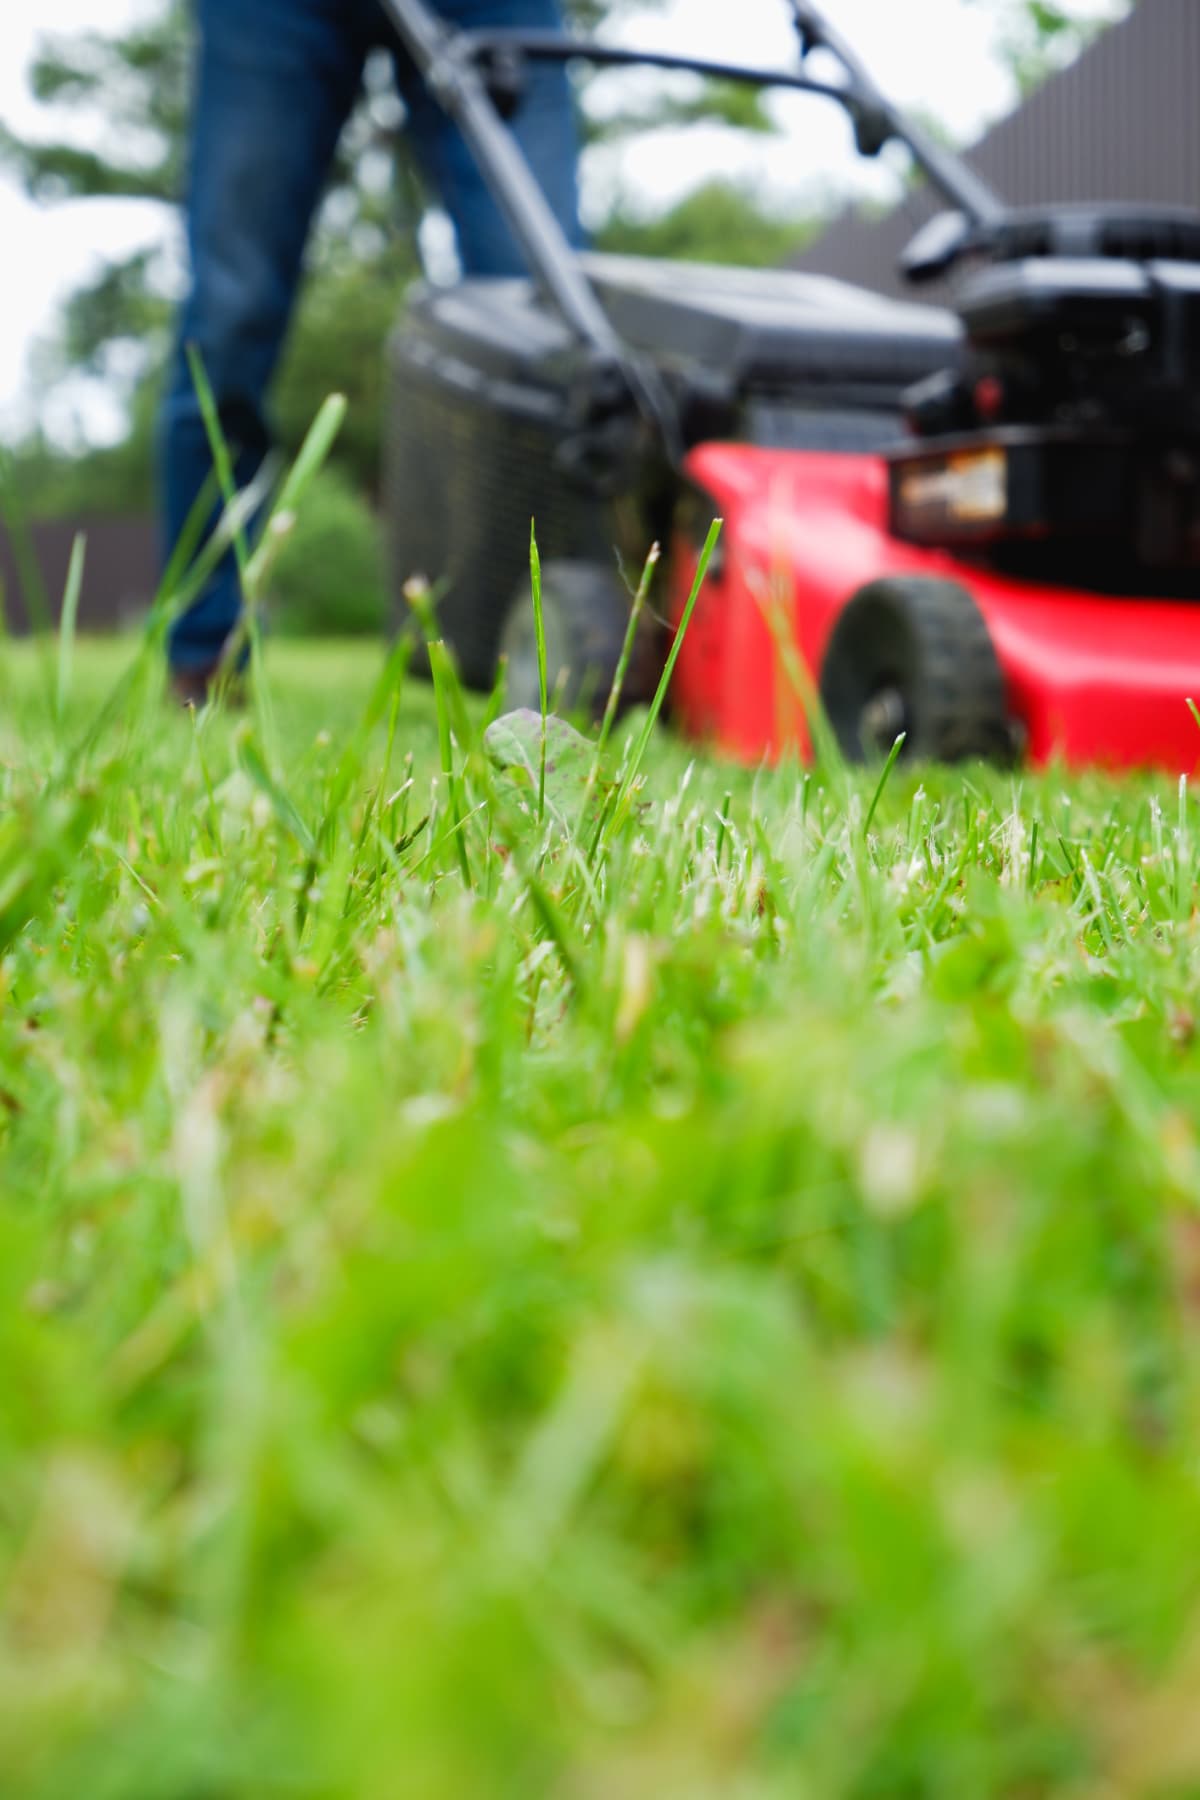 A man in a plaid shirt and blue jeans mows the grass with a lawn mower